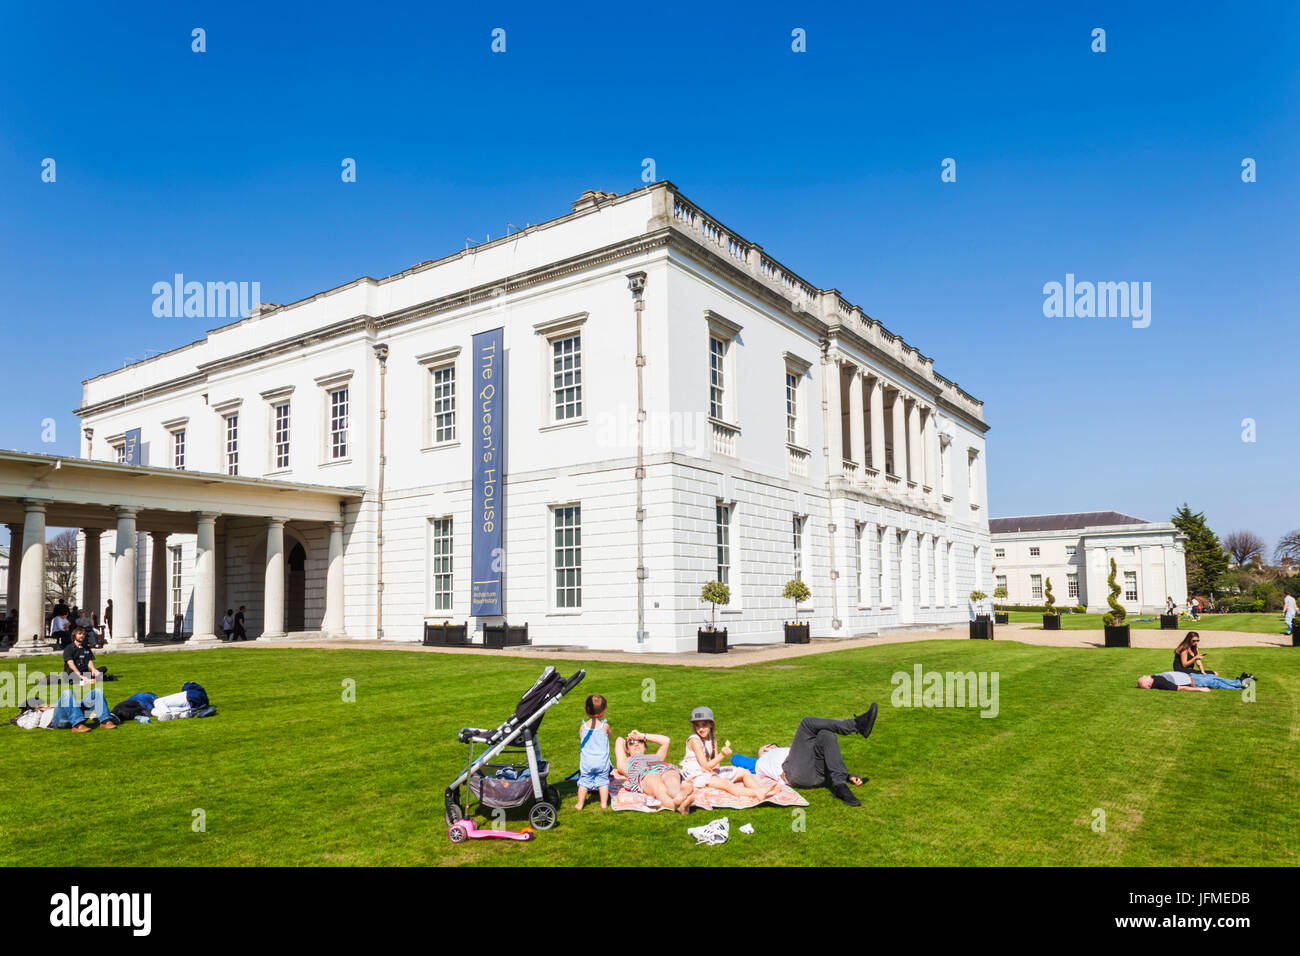 L'Angleterre, Londres, Greenwich, le Queen's House Banque D'Images